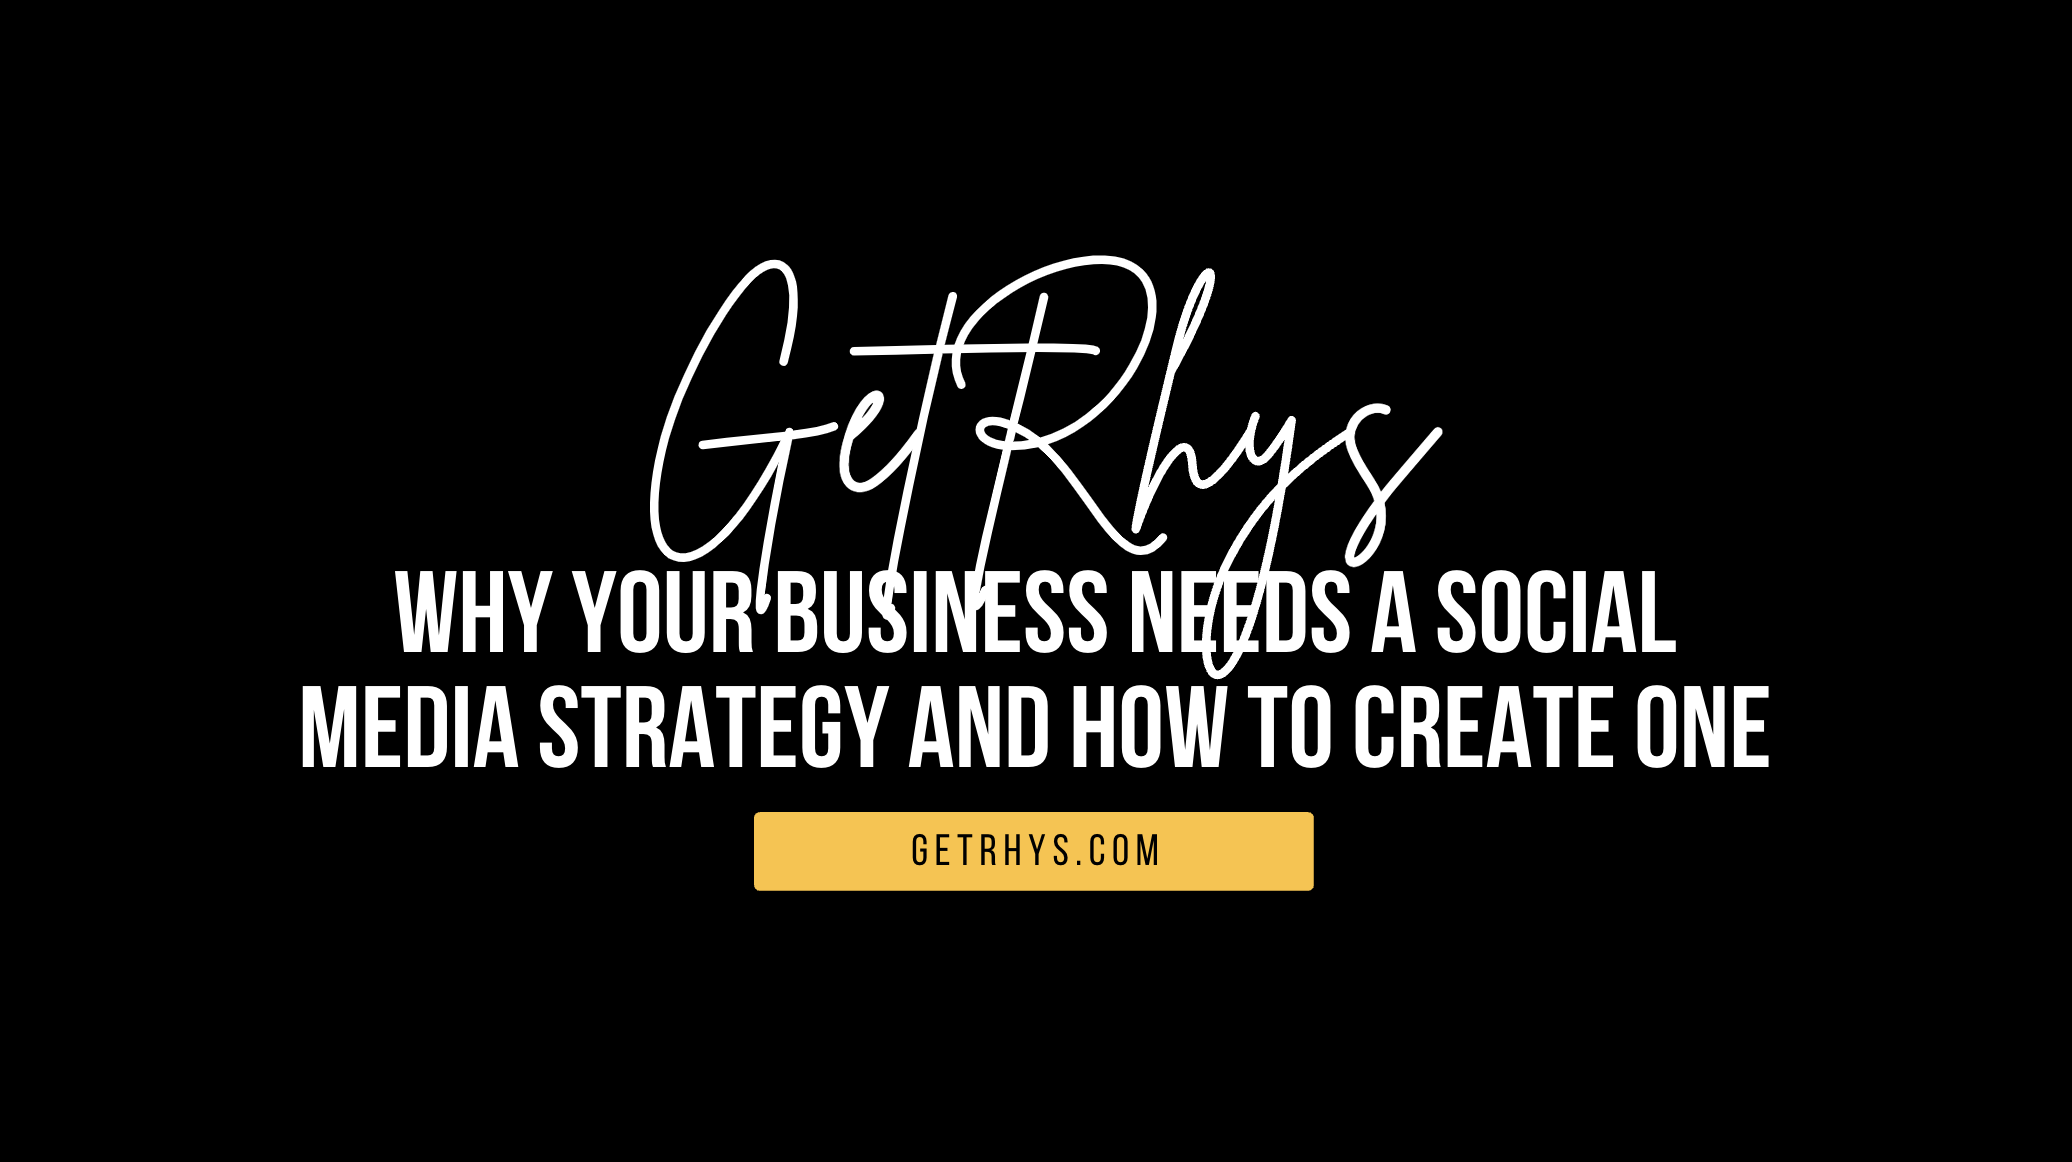 Why your business needs a social media strategy and how to create one